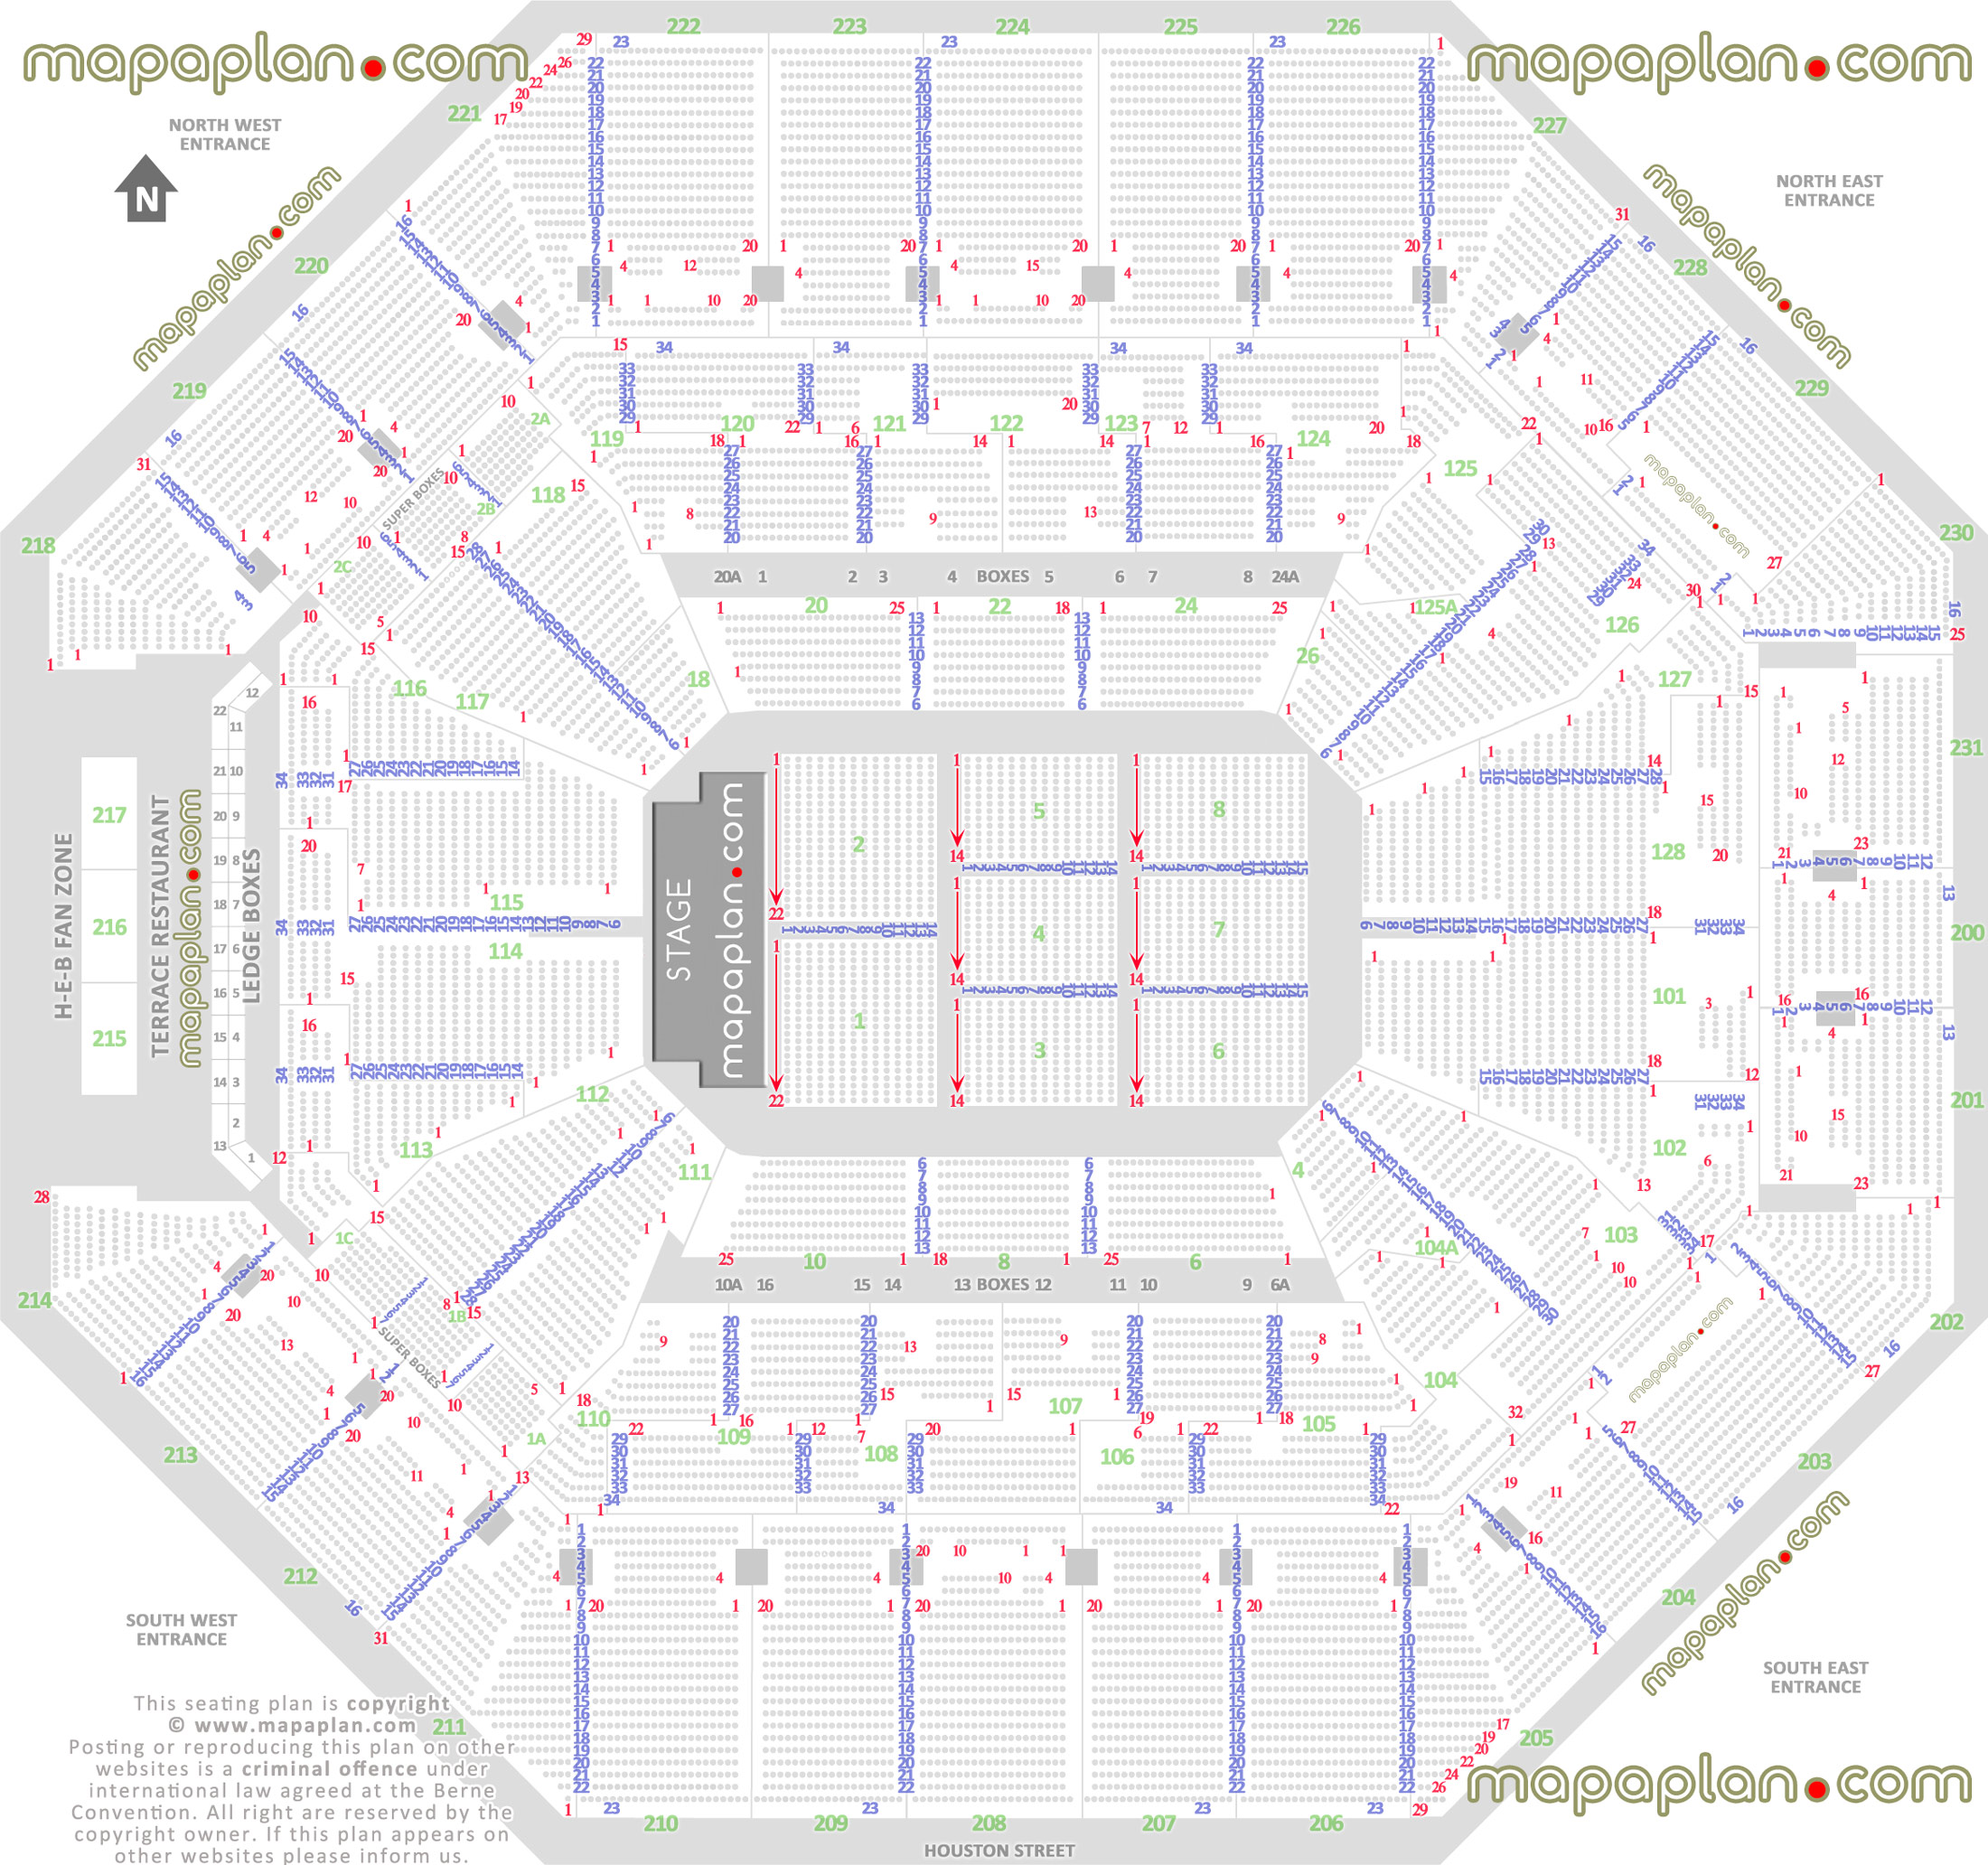 detailed seat row numbers end stage concert sections floor plan map arena lower upper level layout San Antonio Frost Bank Center seating chart